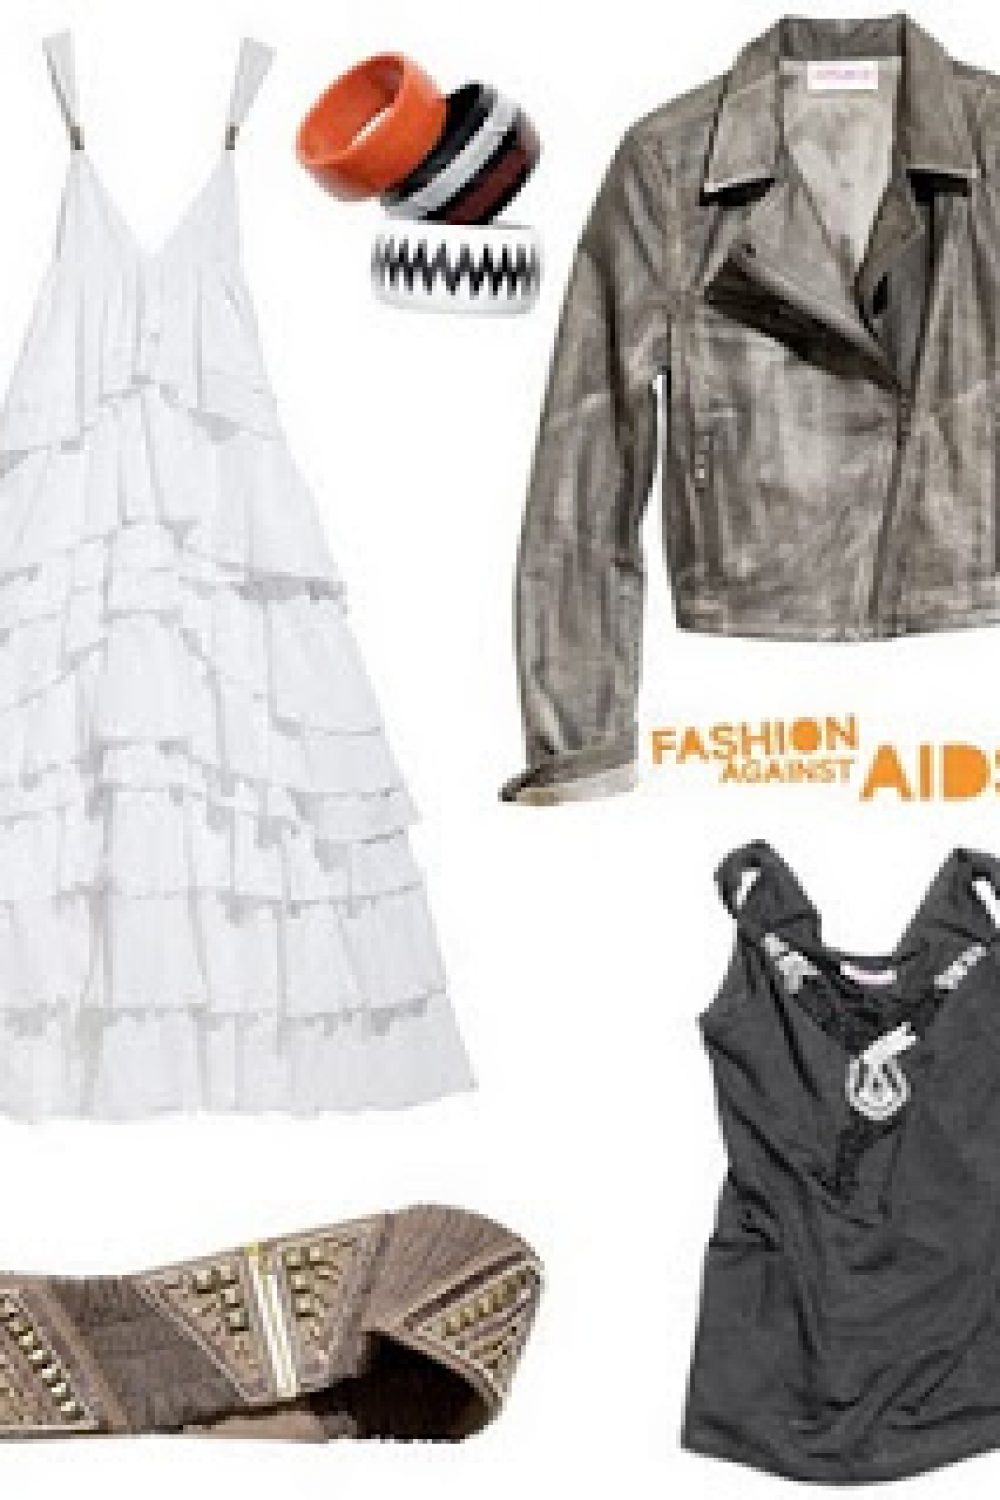 Chic Alert! H&M’s New Fashion Against AIDS Collection